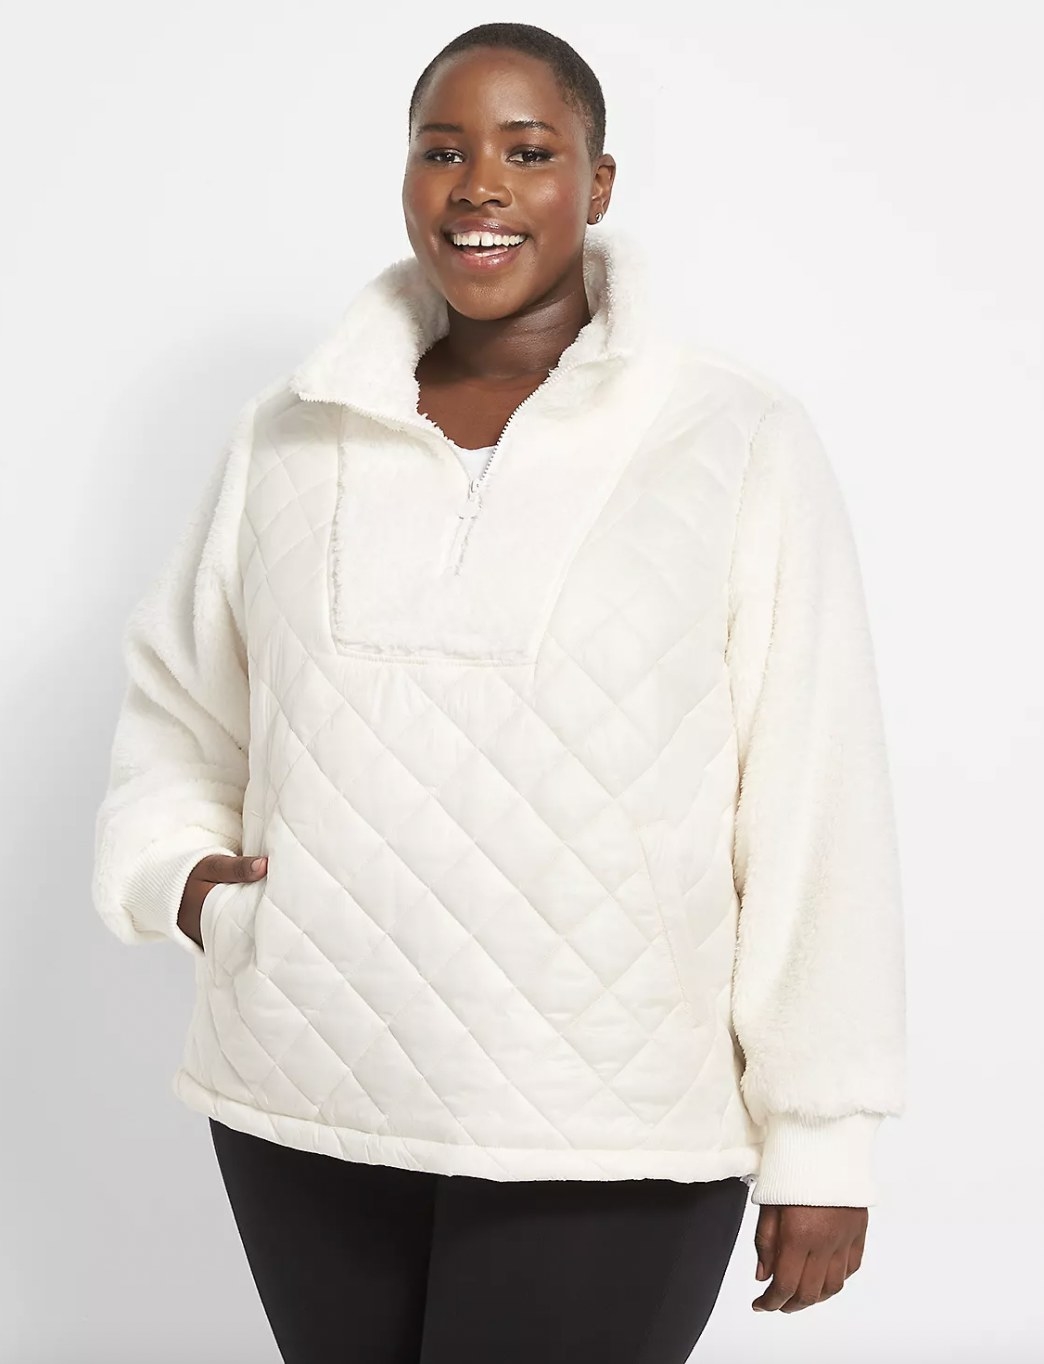 A person wearing a cream sherpa with black leggings